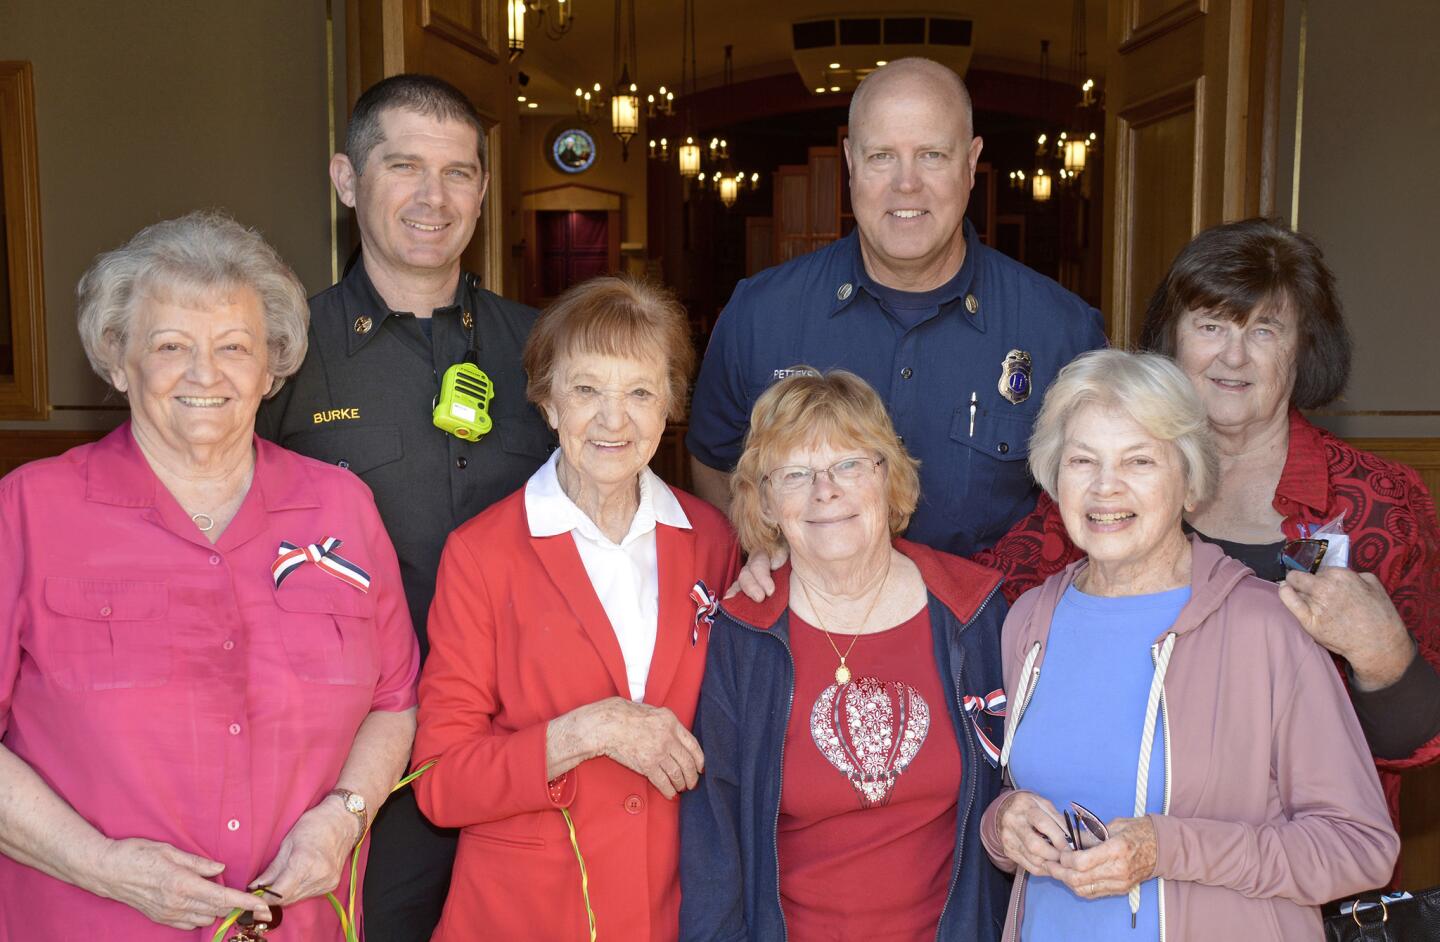 Fire Marshall Dave Burke, second from left, and Captain Joel Petteys, were welcomed by members of the Golden Girls Cookie Brigade, Kaye Miljanich, from left, Doris Owings, Darlene Niers, Mary Dunn, and Jeanne Finn.